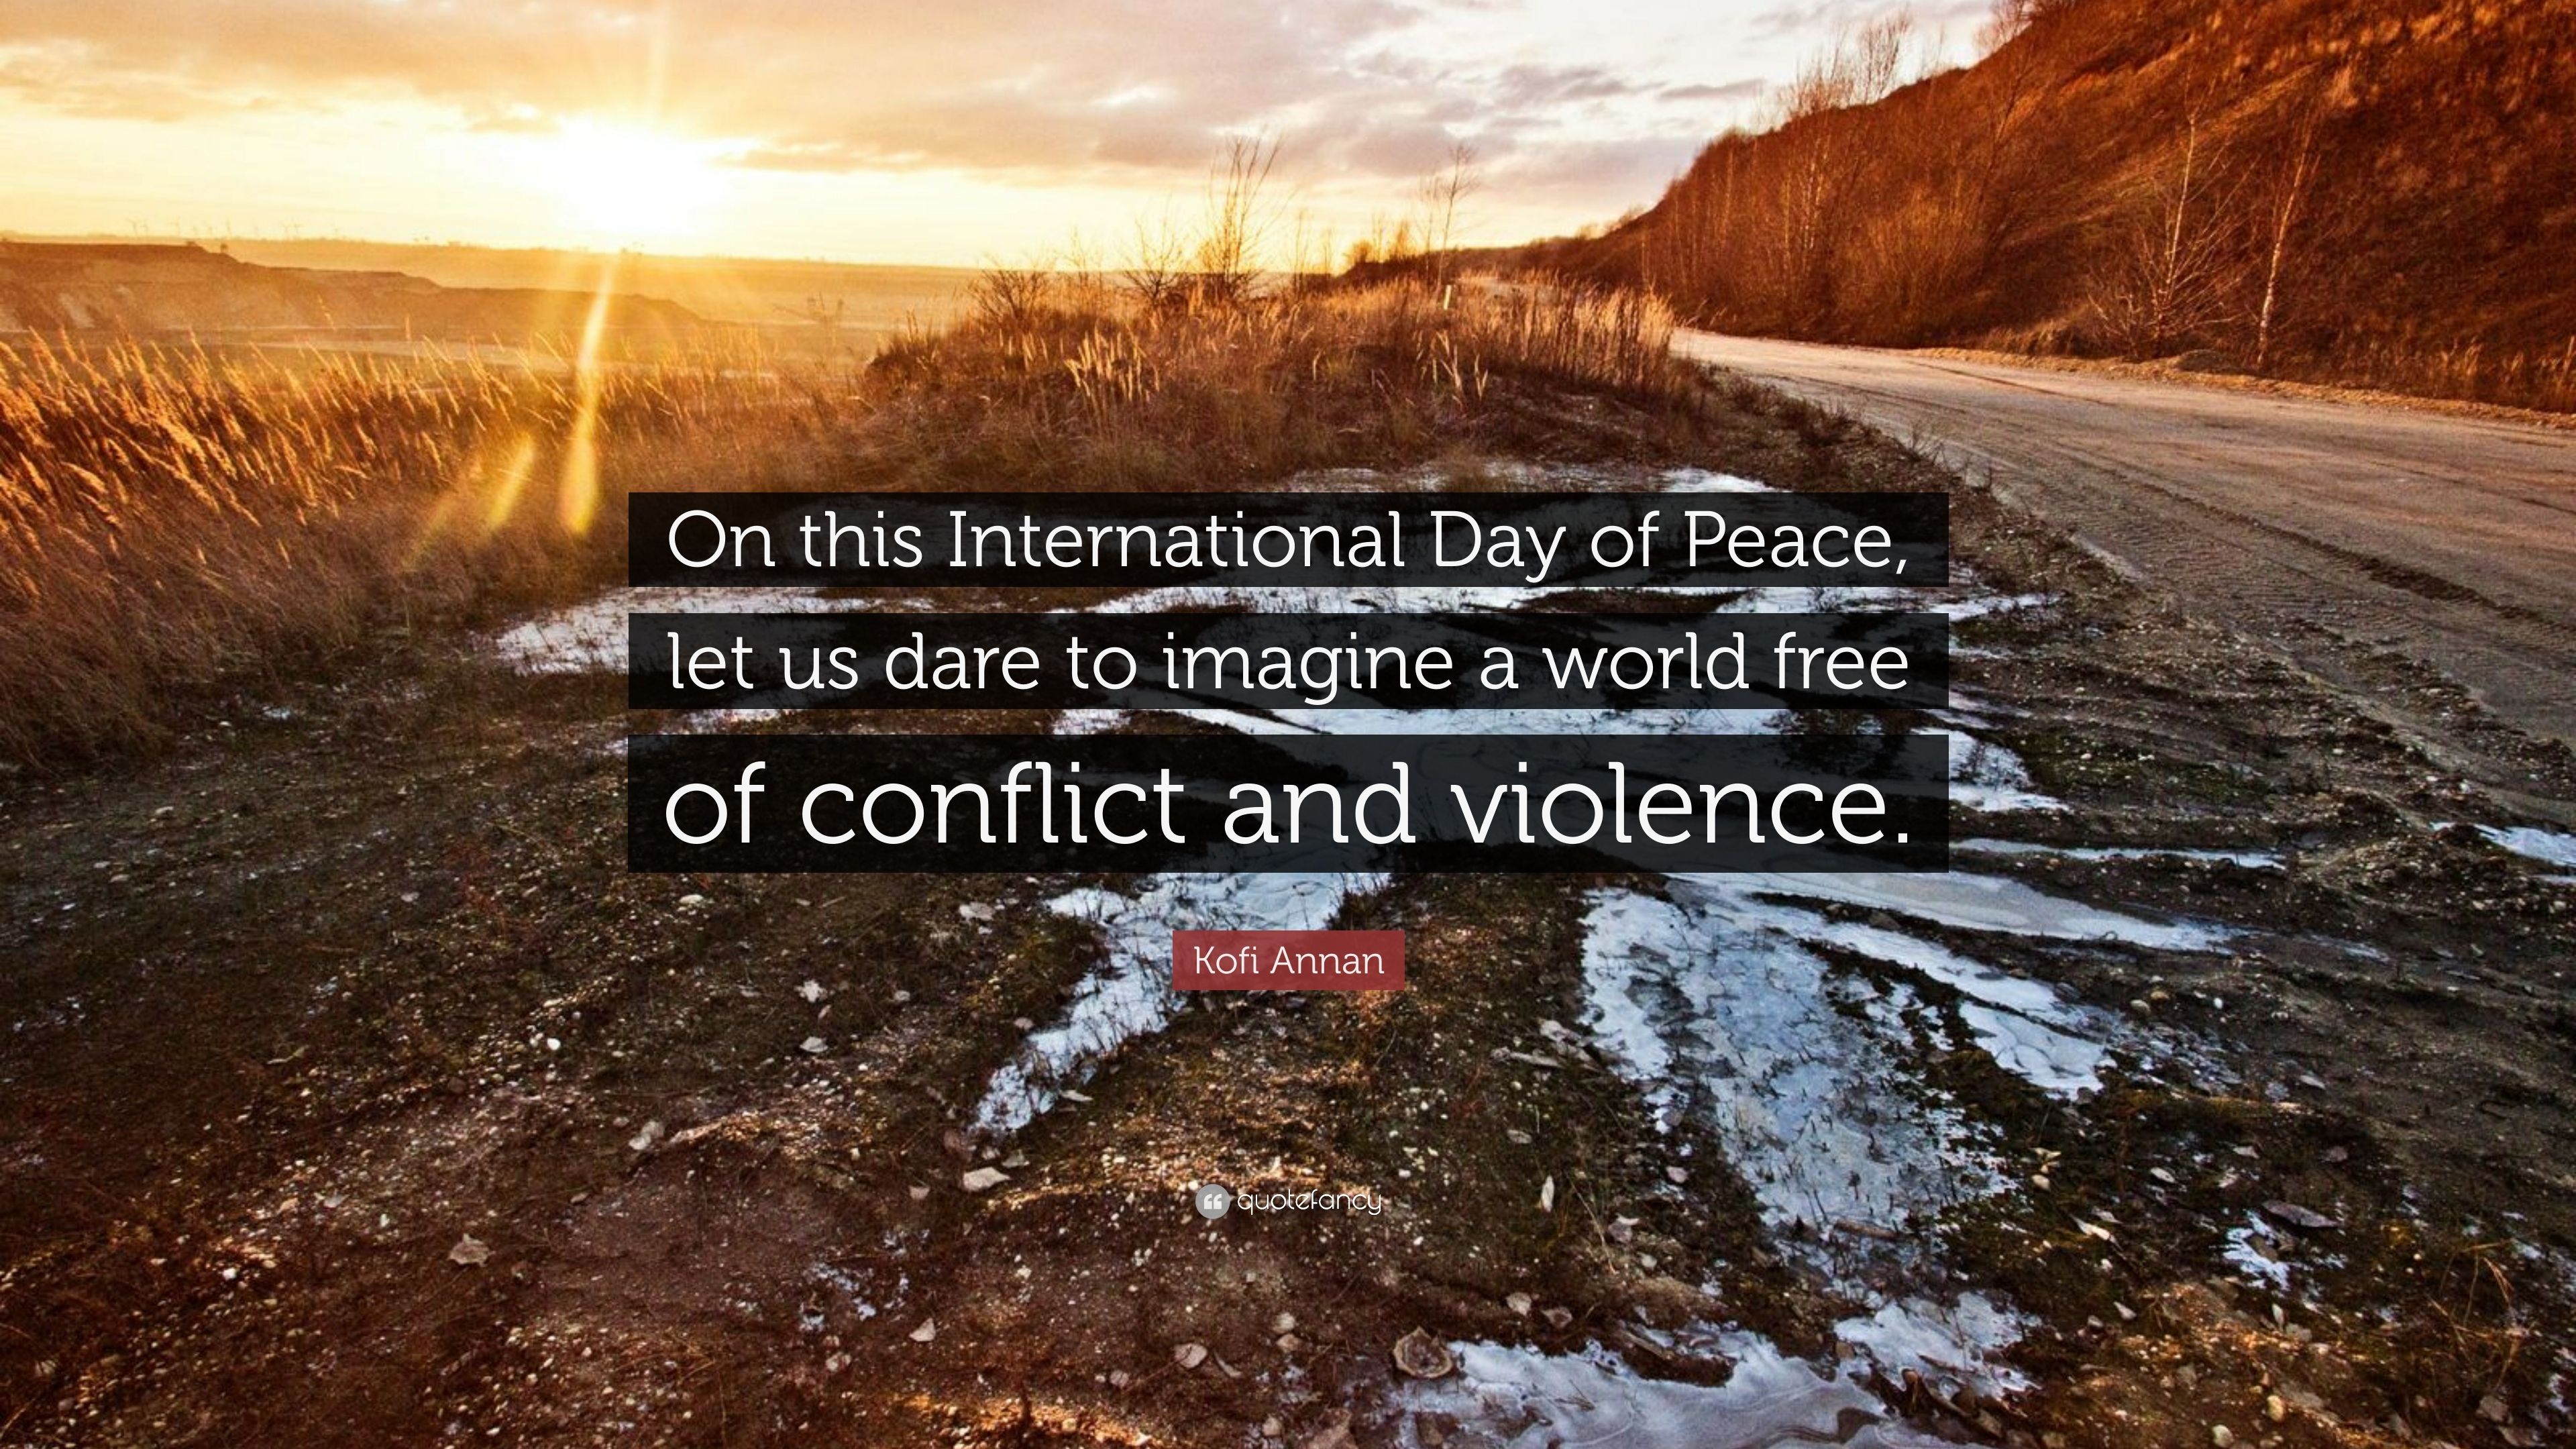 Kofi Annan Quote: “On this International Day of Peace, let us dare